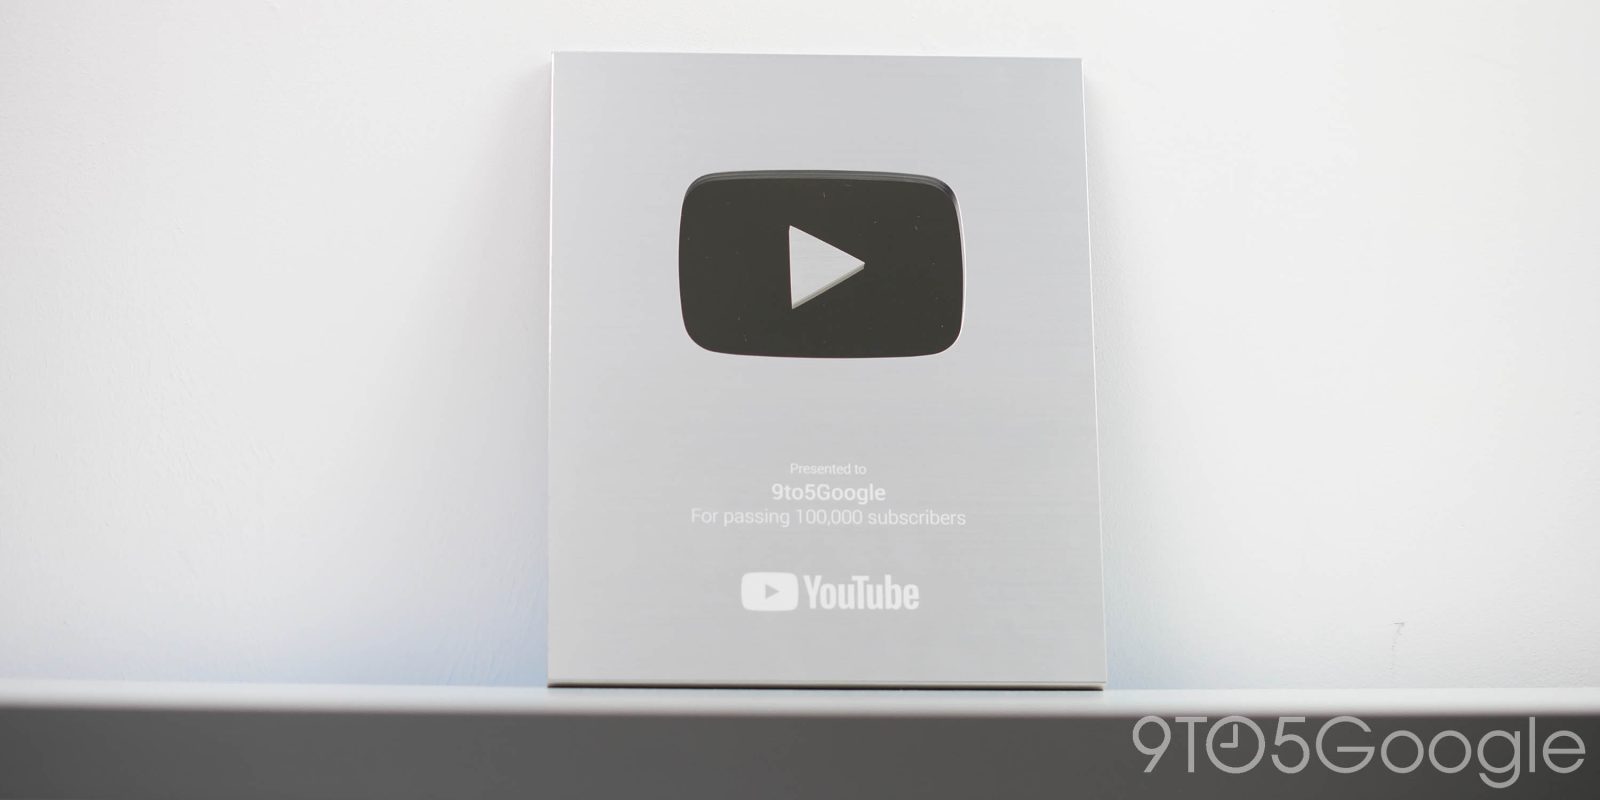 YouTube Silver Play Button: How do I get one? [Video] - 9to5Google